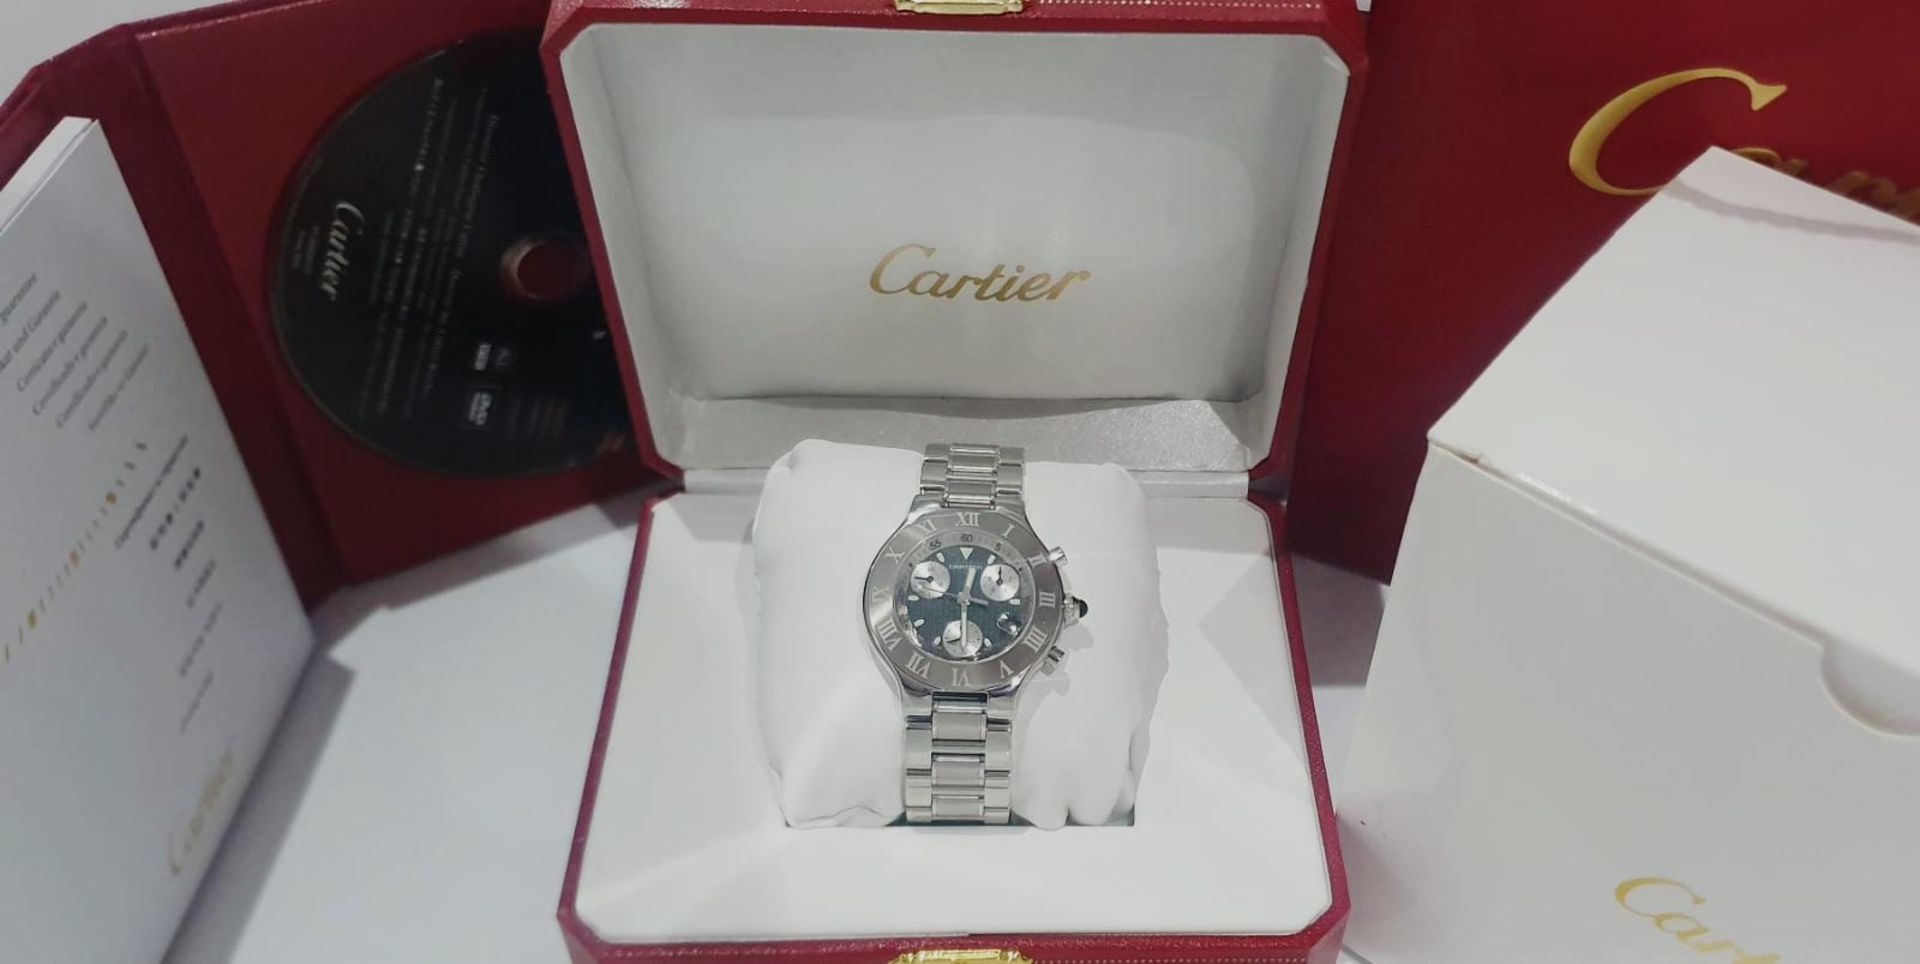 CARTIER CHRONOGRAPH MENS SWISS WATCH, STAINLESS STEEL NO VAT - Image 10 of 10